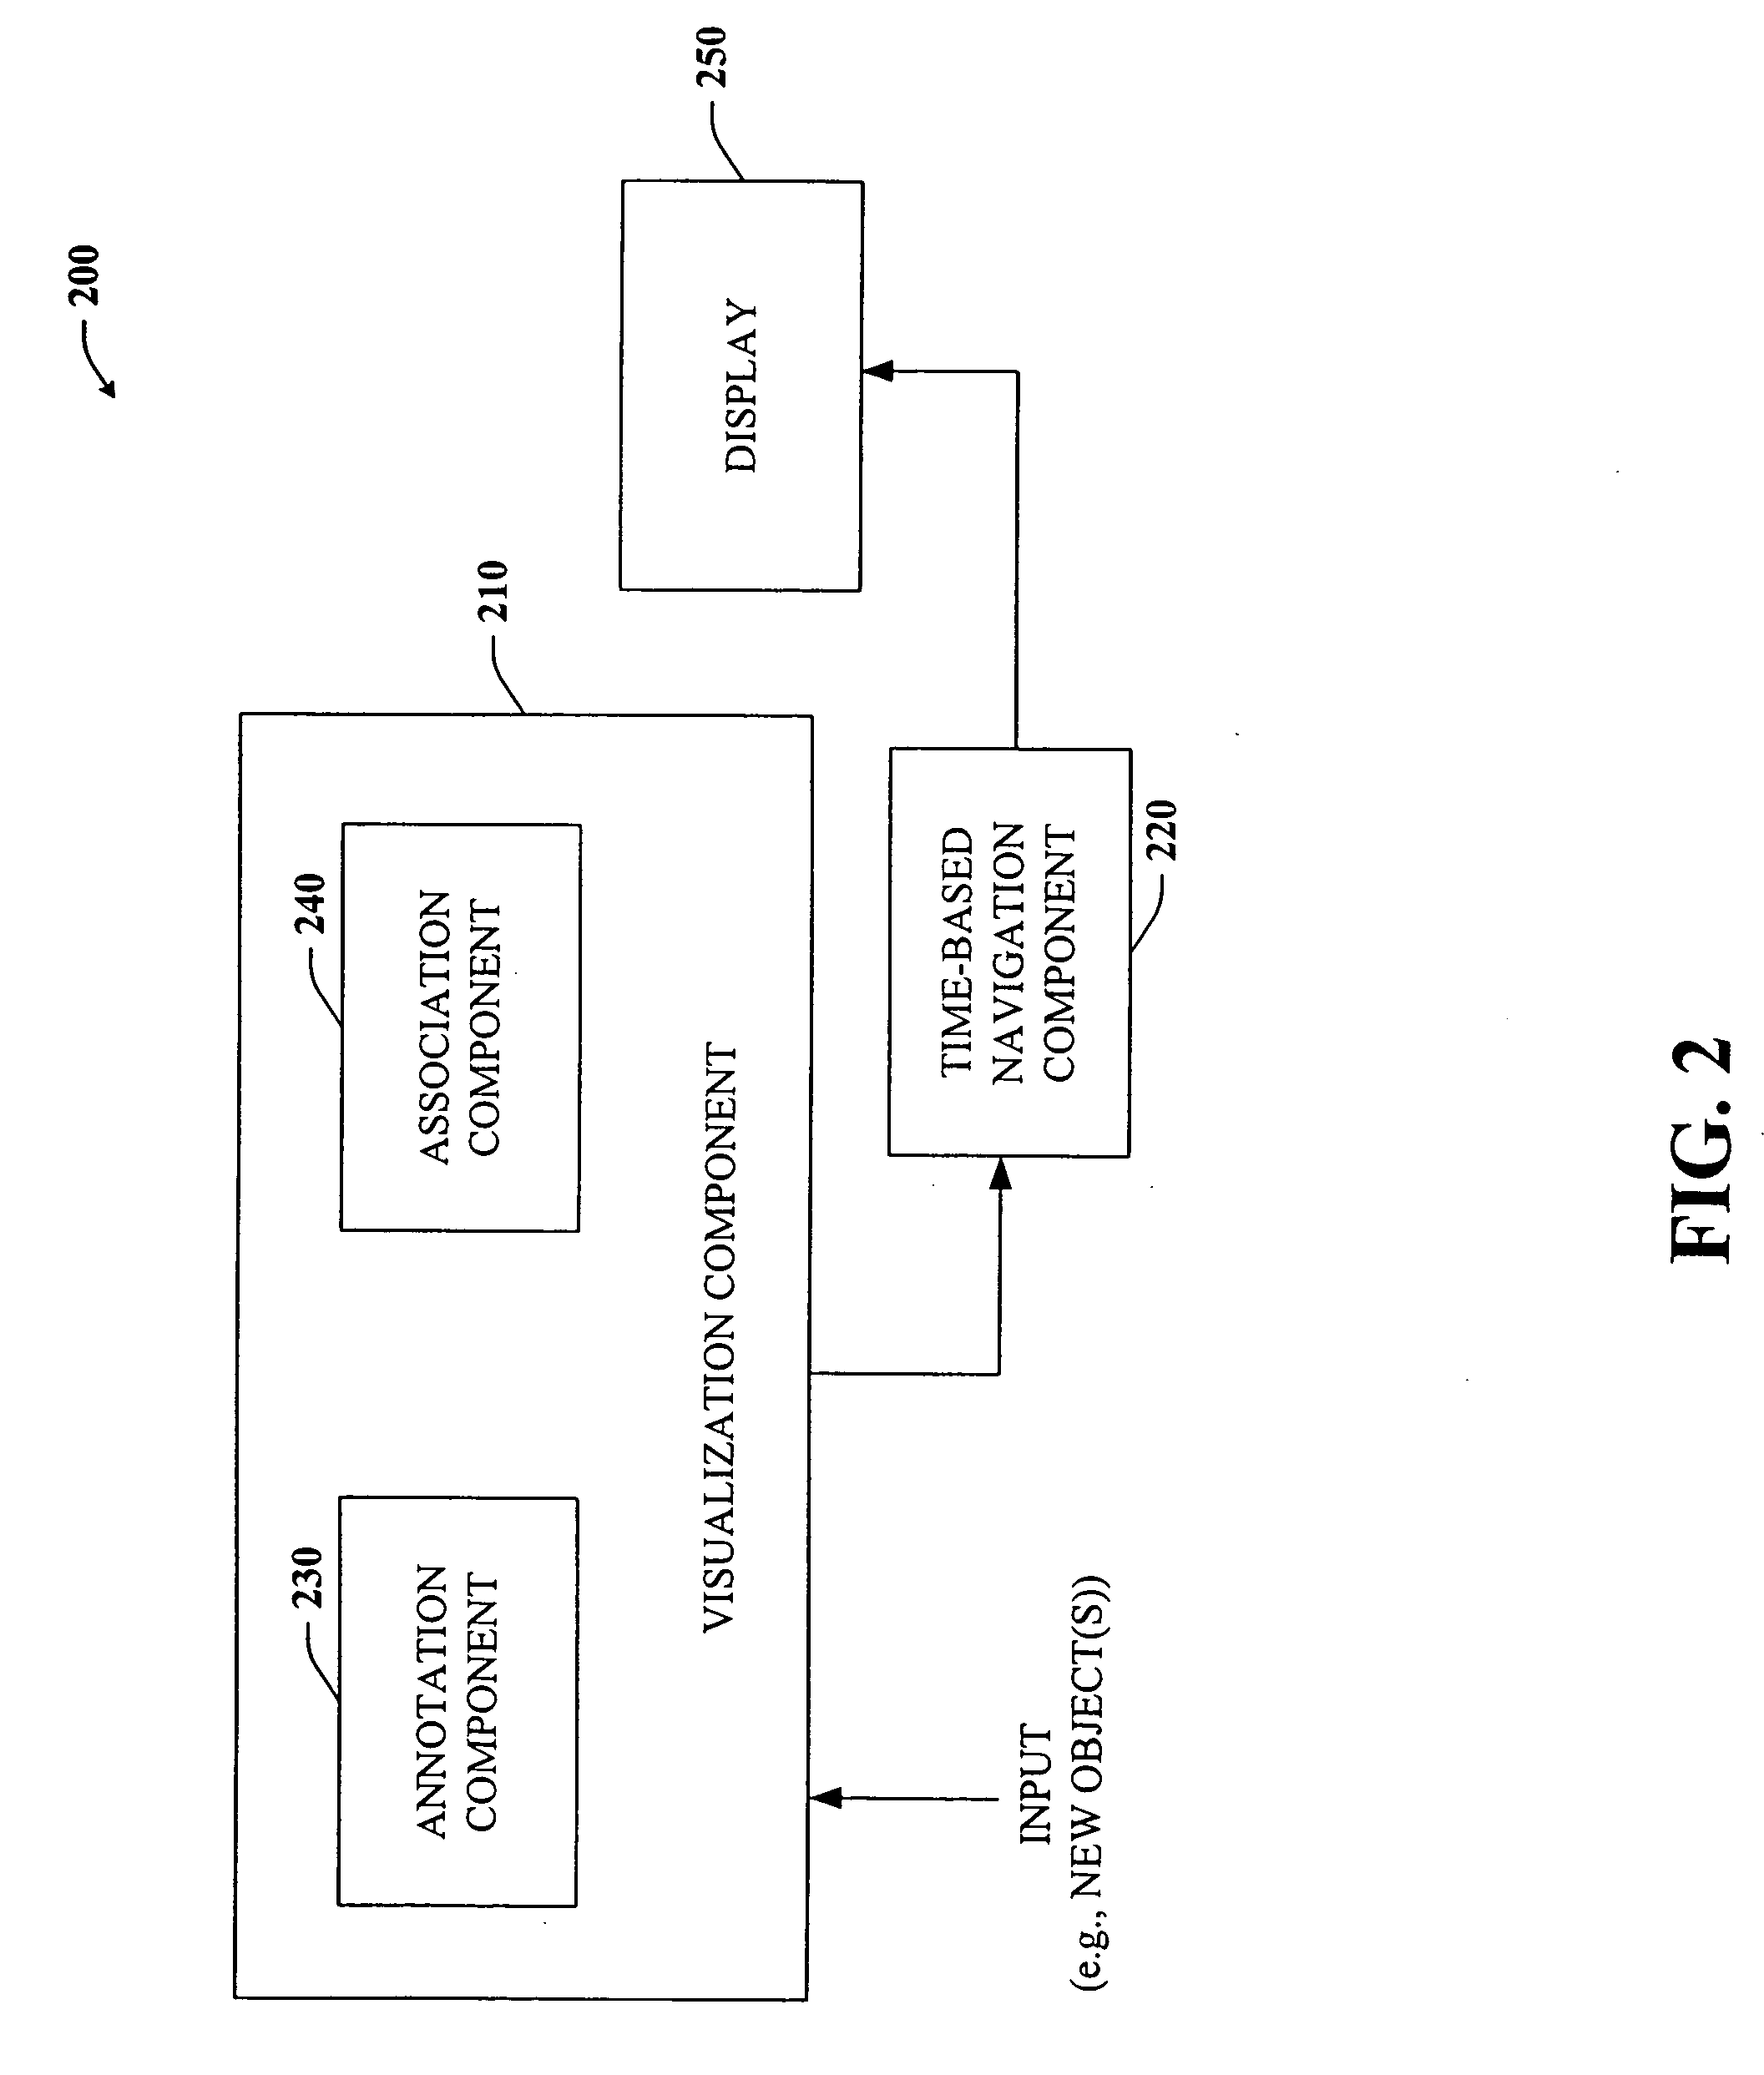 File management system employing time line based representation of data